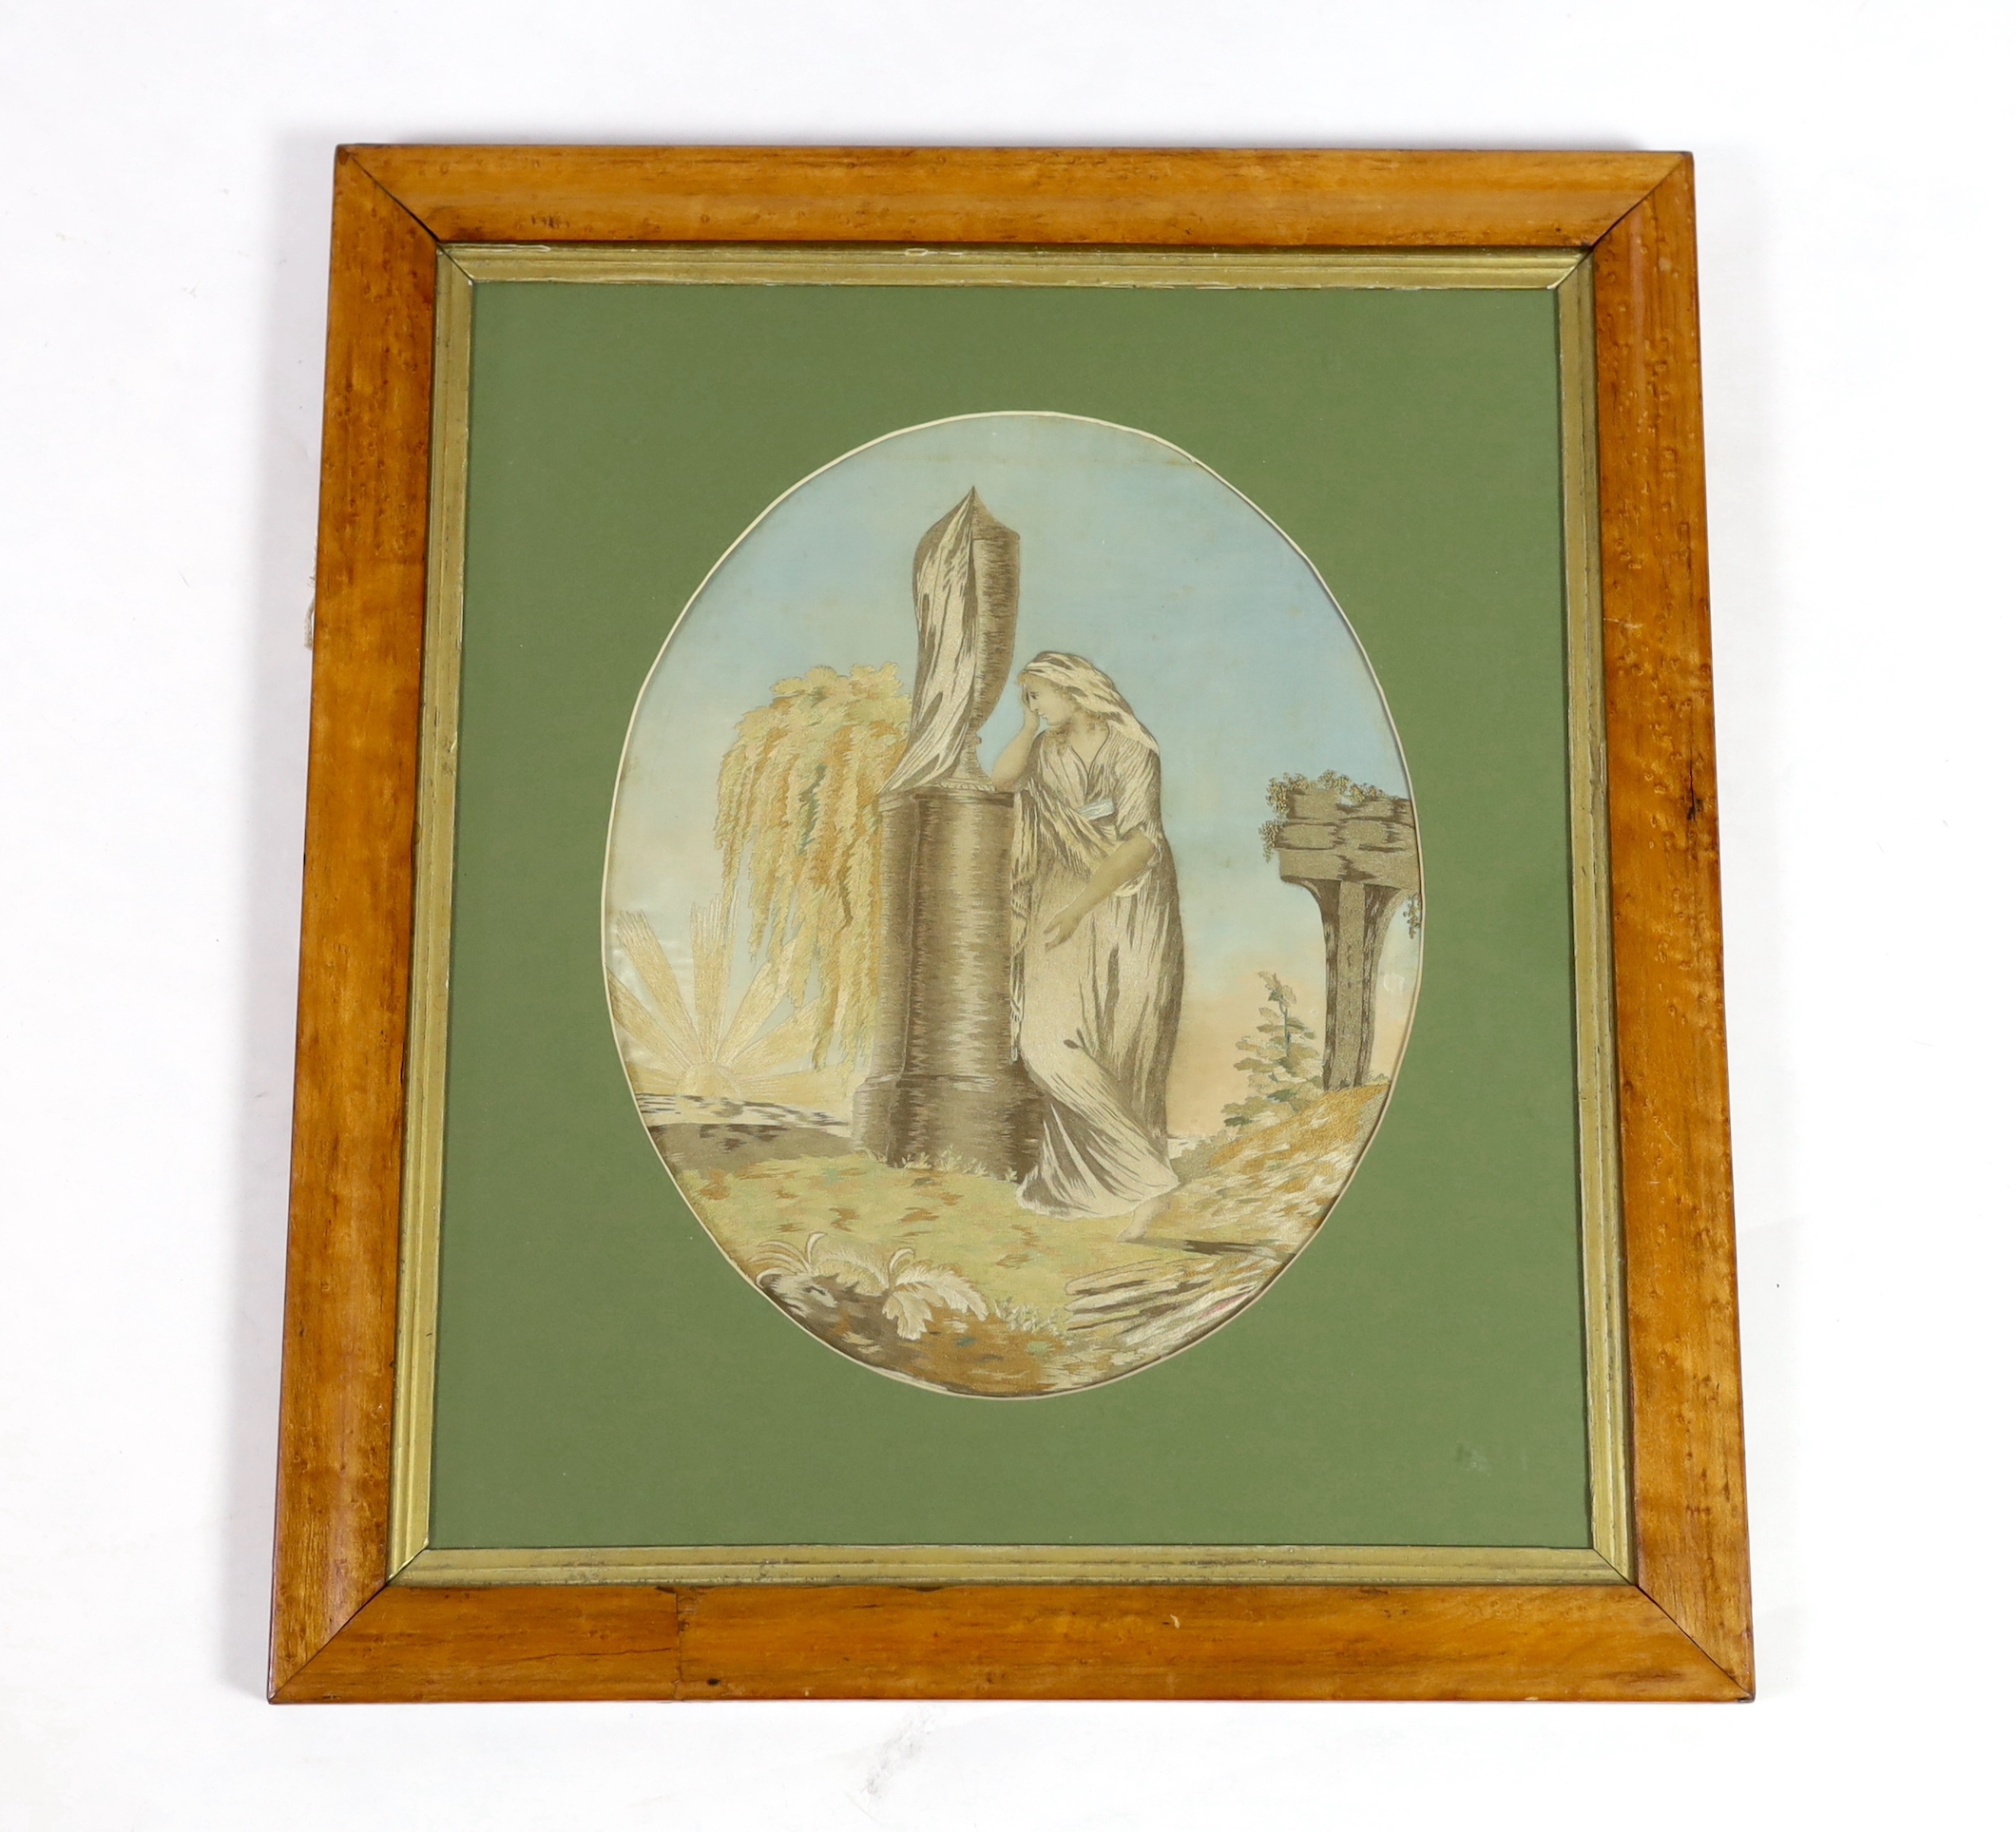 A Regency maple framed oval silk worked embroidery; a classical scene of young female figure by a garden urn. Worked mostly in stem stitch in subtle greys, browns and ochres, embroidery 33cm high